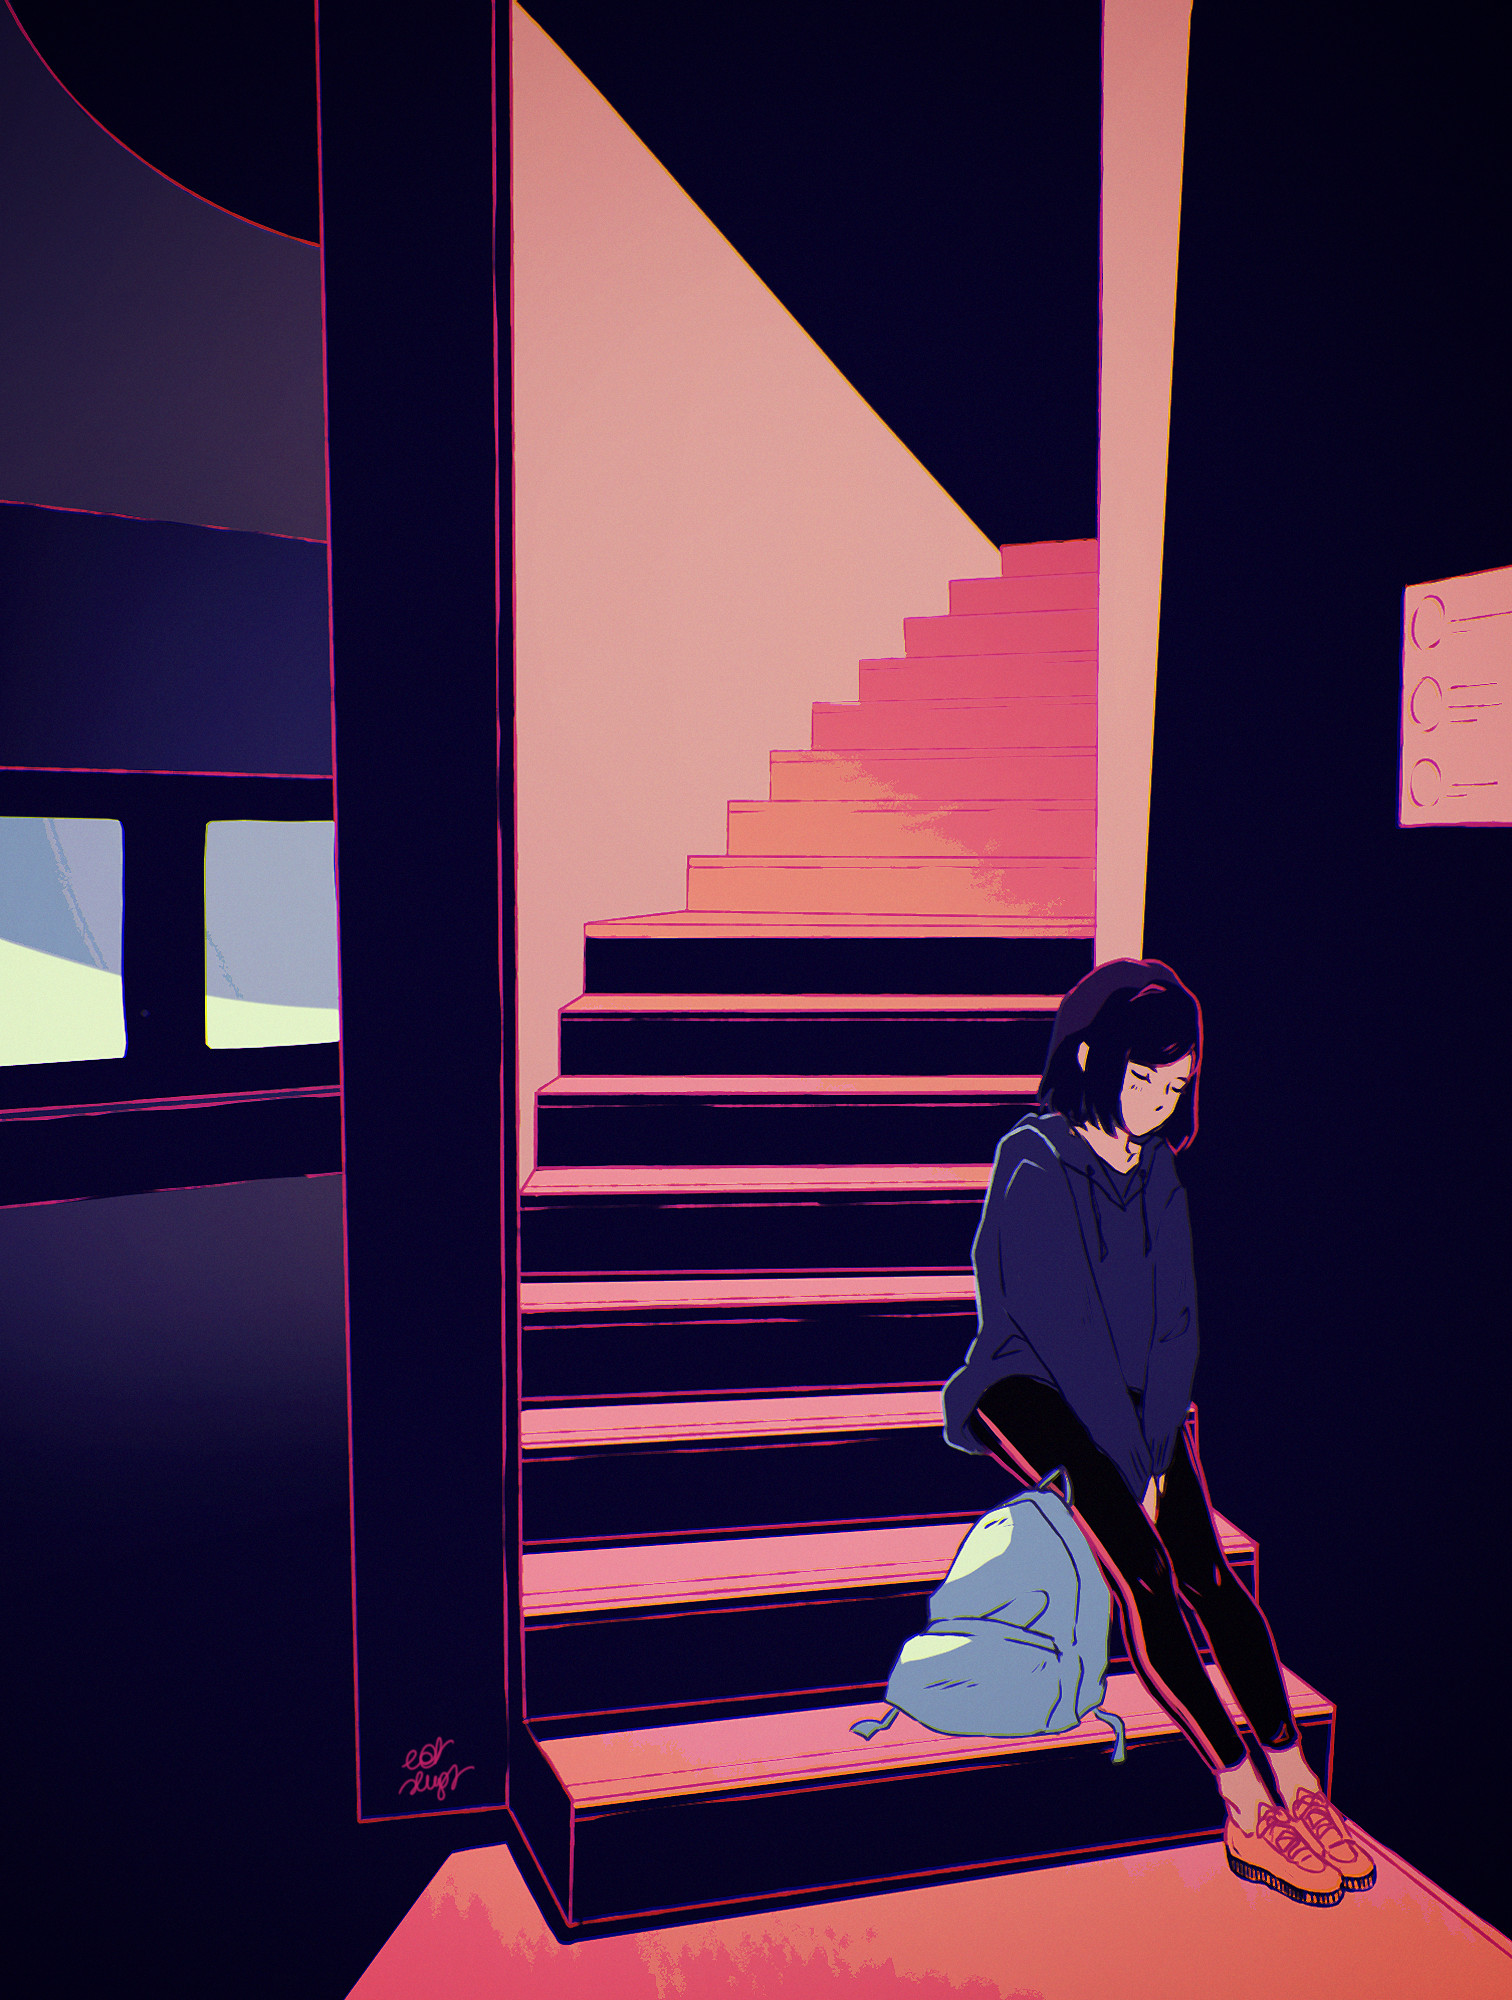 139552 Screensavers and Wallpapers Stairs for phone. Download art, vector, sadness, girl, stairs, ladder, loneliness, sorrow pictures for free